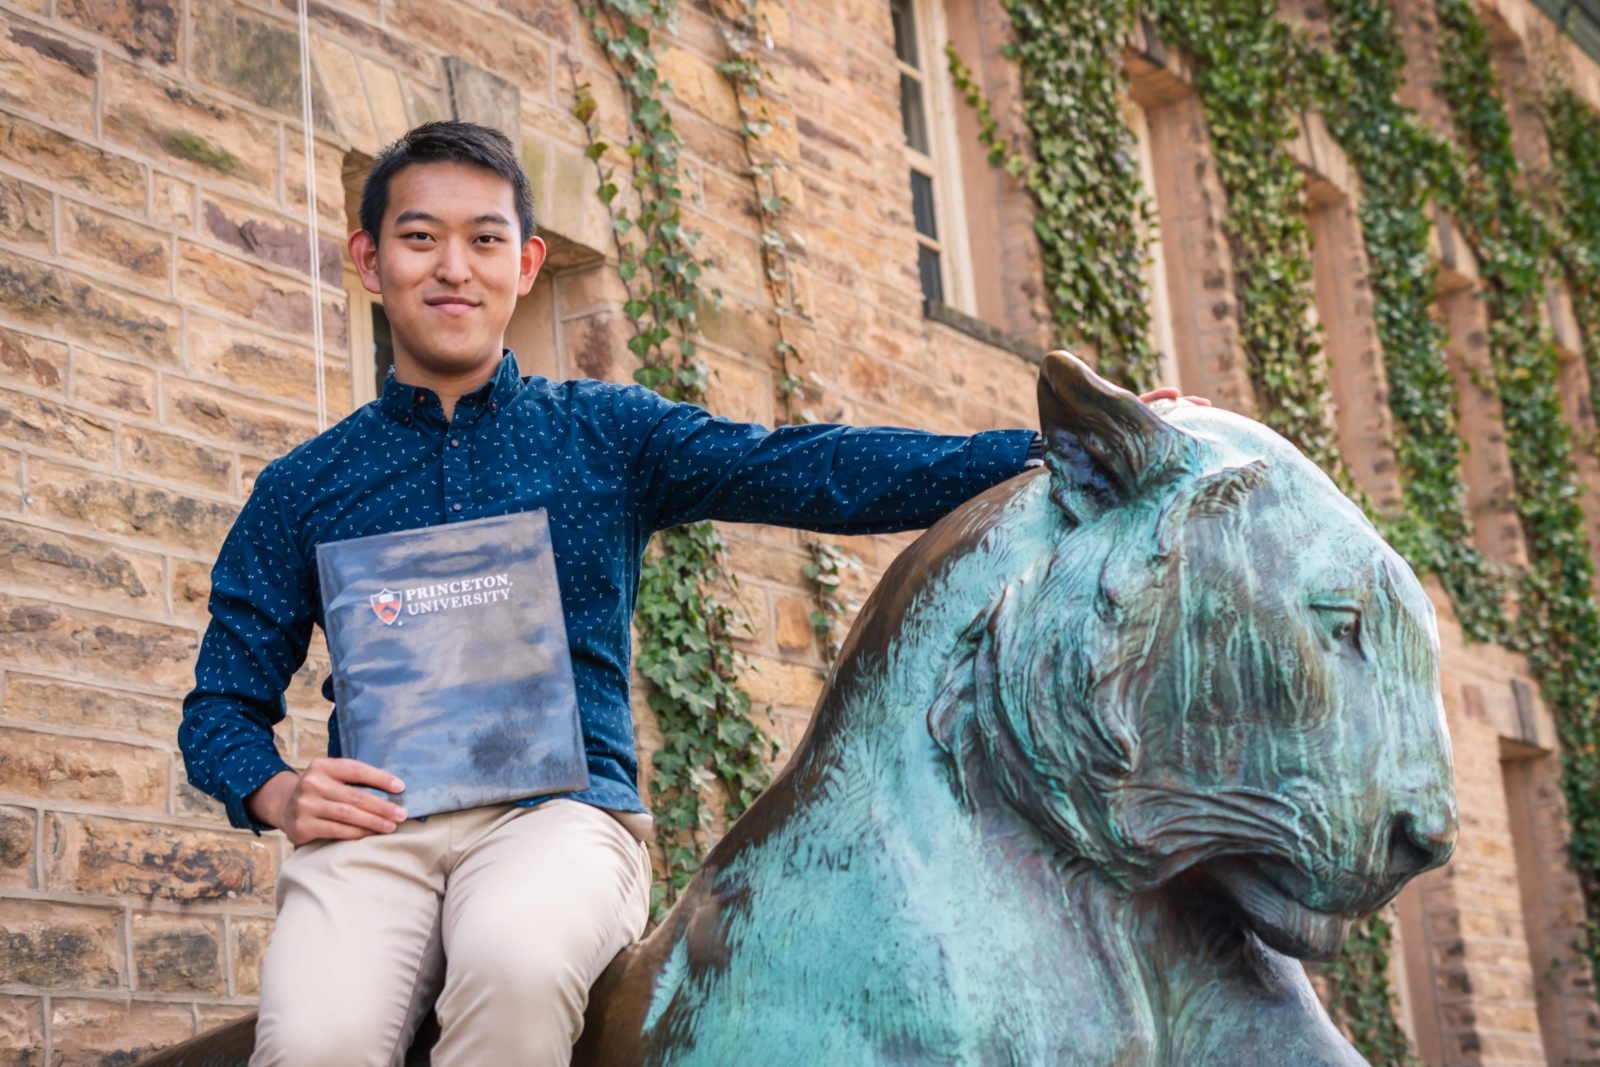 Yang Song sitting on the bronze tiger on the front steps of Nassau Hall.  He's holding a black folder with the Princeton University logo on the front.